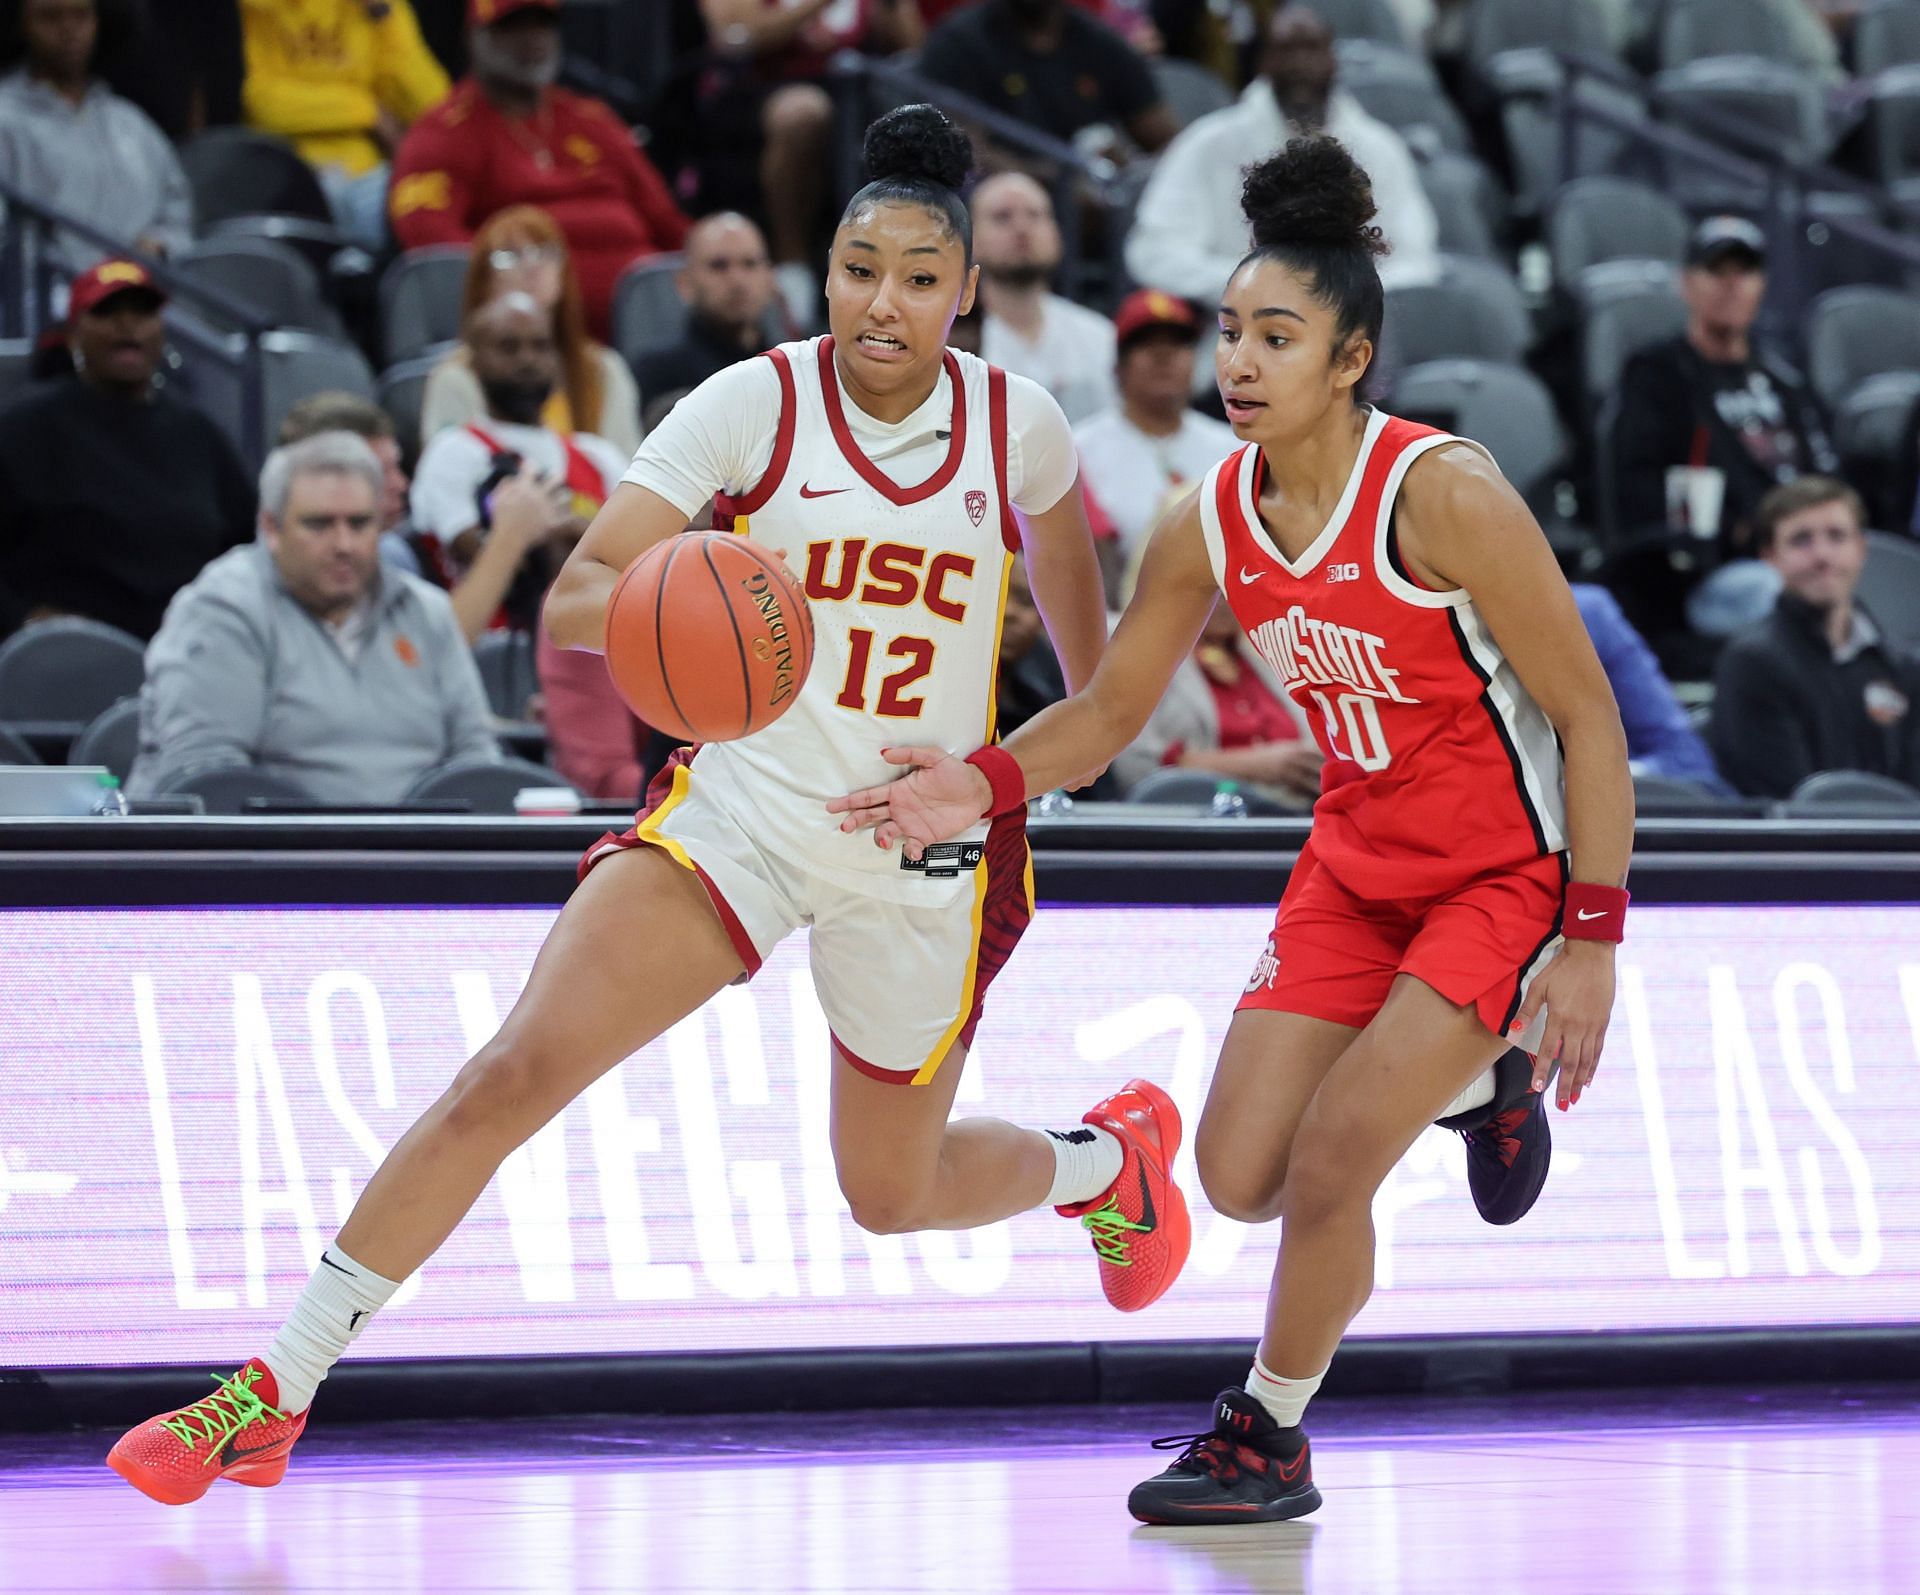 JuJu Watkins #12 of the USC Trojans drives against Diana Collins #20 of the Ohio State Buckeyes in the second half of their game